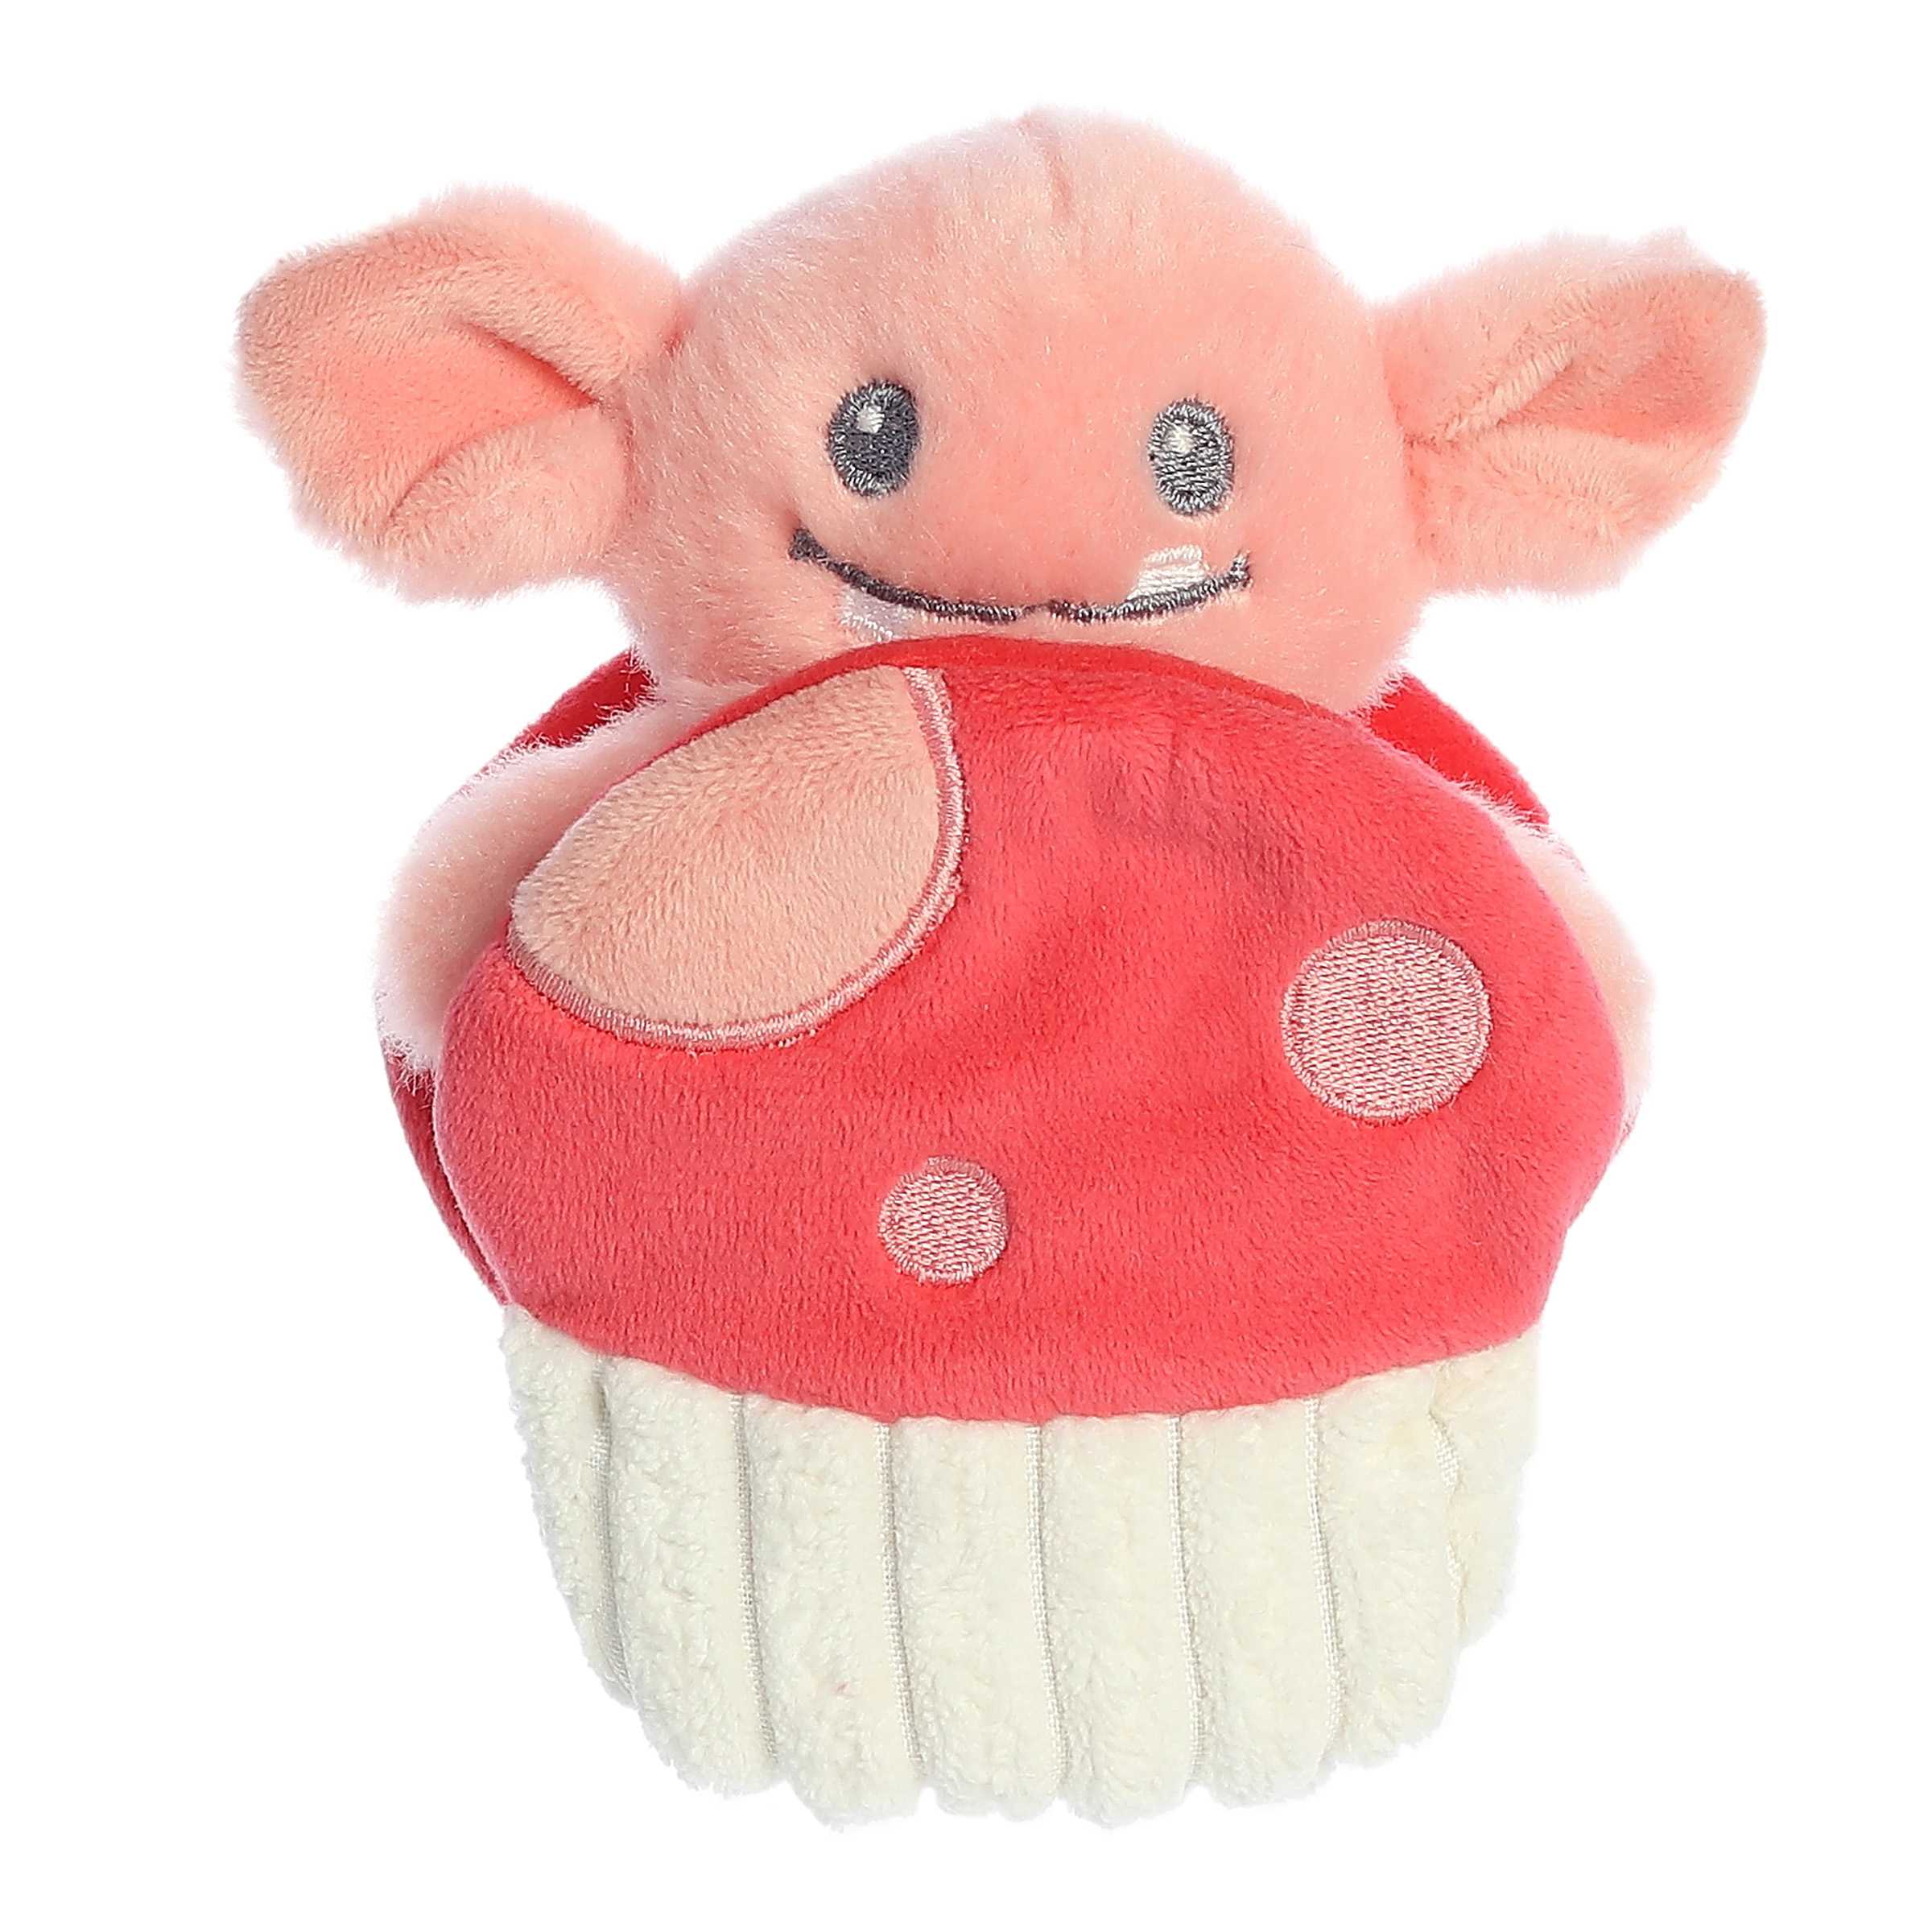 Interactive mini peach Goblin plush rattle toy with smiling face sitting inside a crinkly red and white mushroom pocket